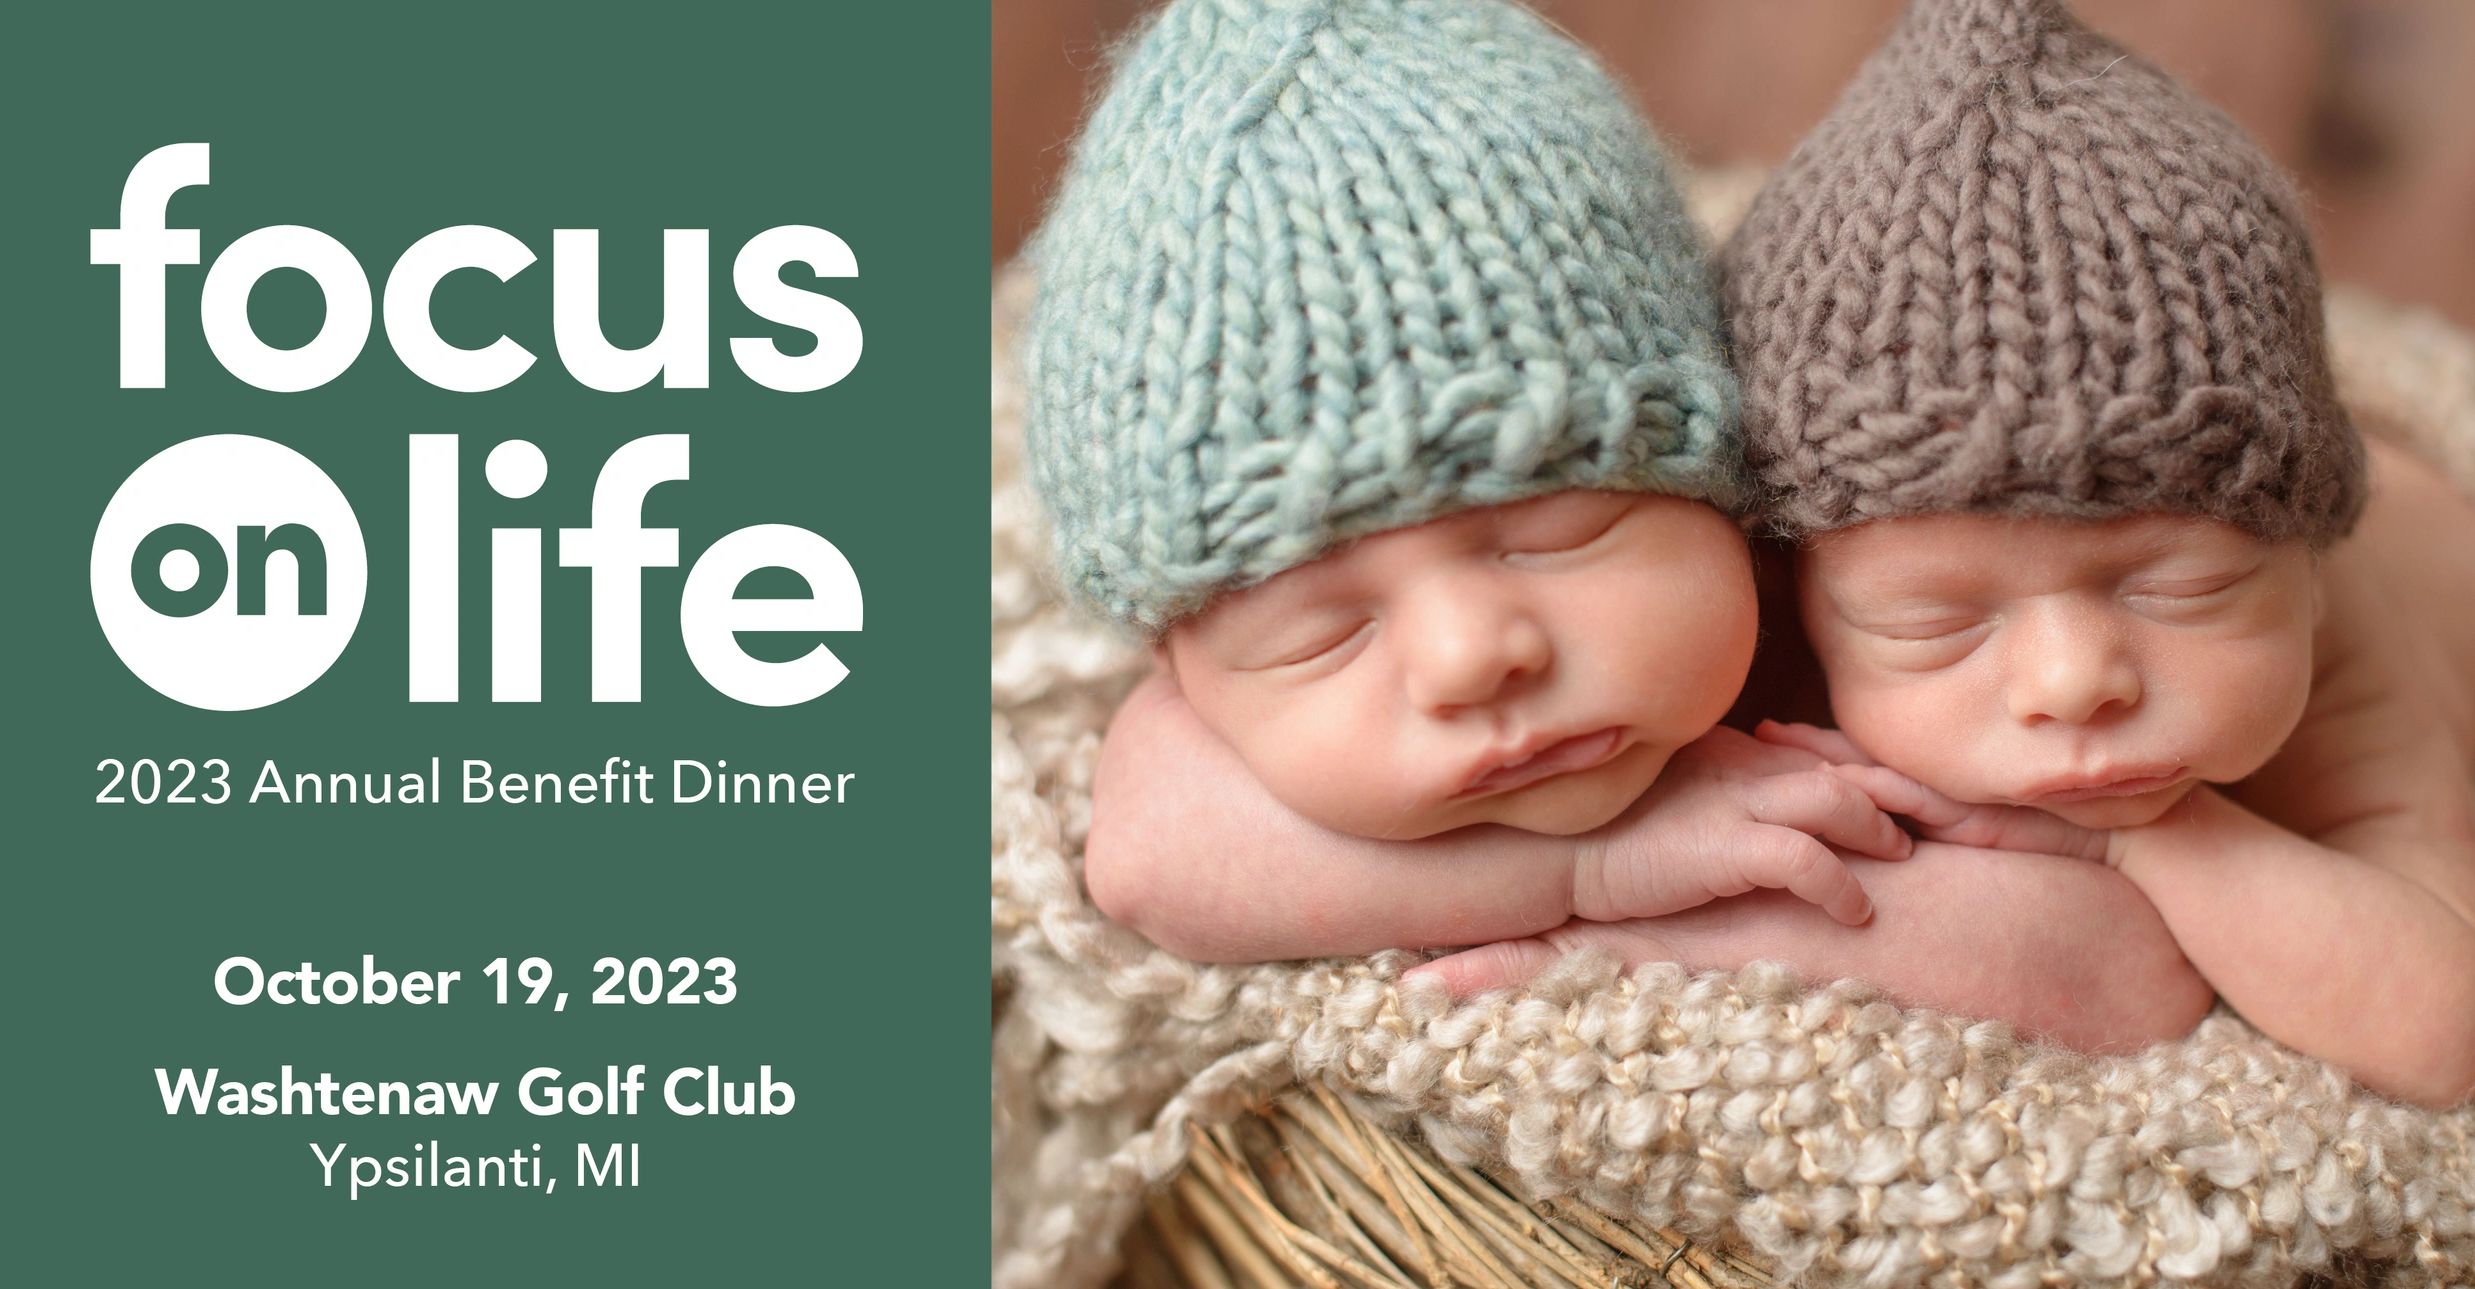 Our Annual Focus on Life Benefit Dinner 2023